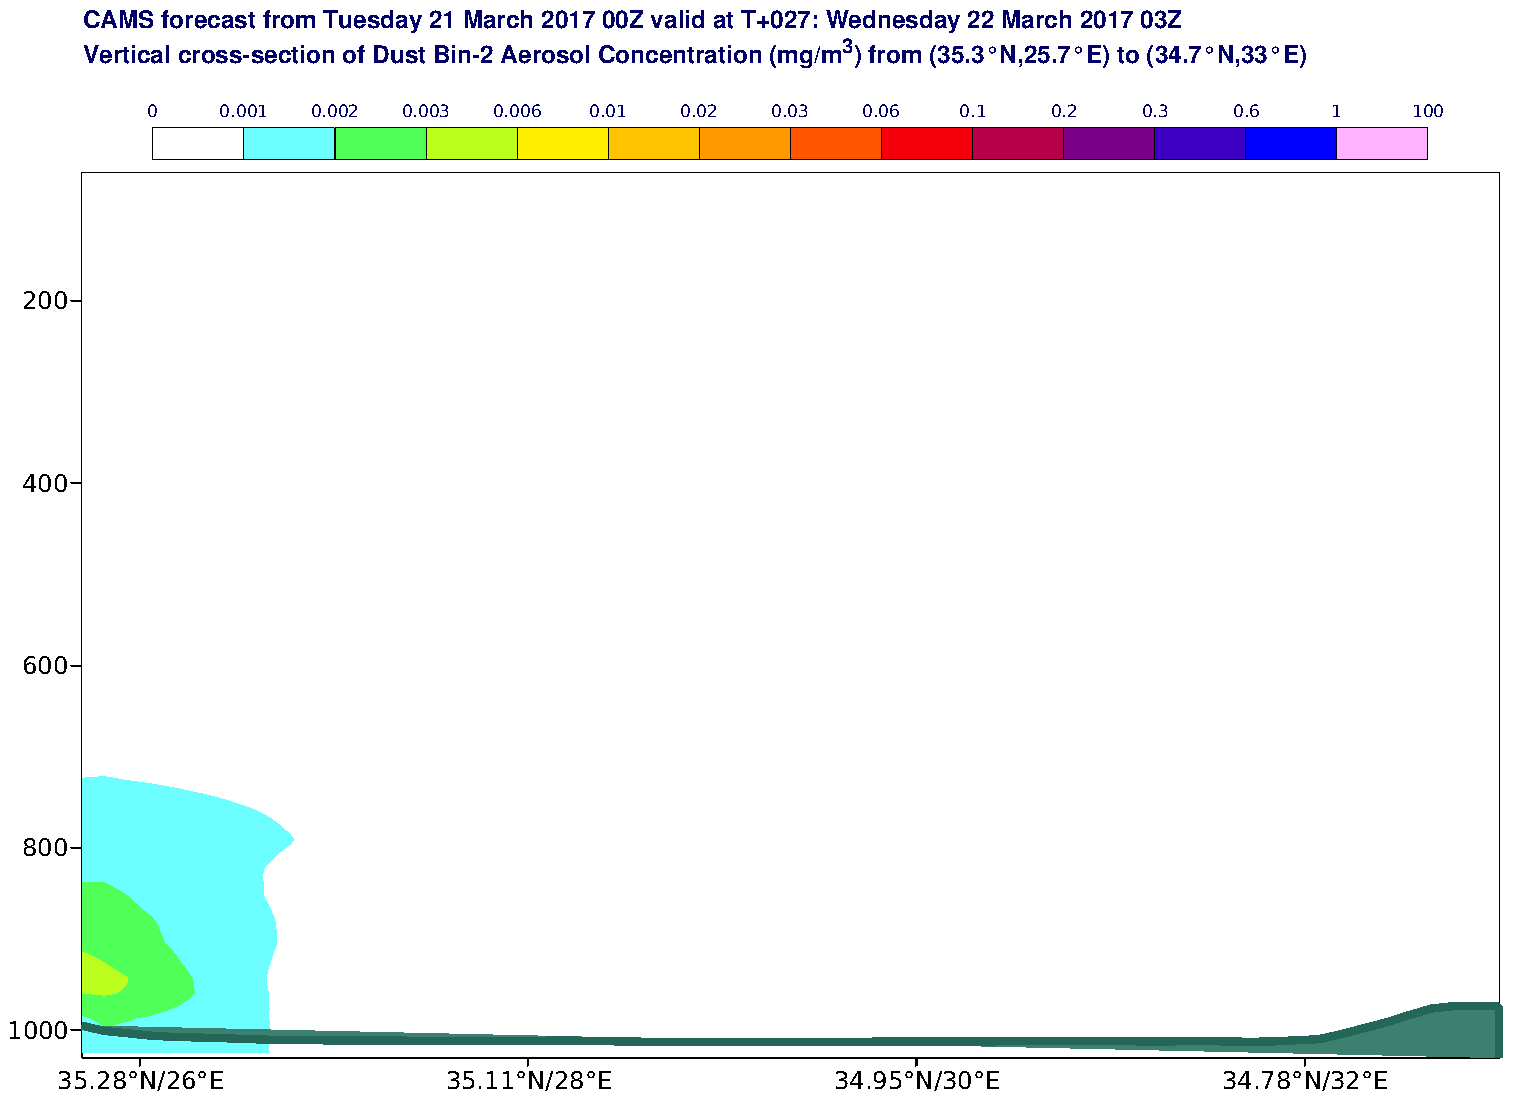 Vertical cross-section of Dust Bin-2 Aerosol Concentration (mg/m3) valid at T27 - 2017-03-22 03:00